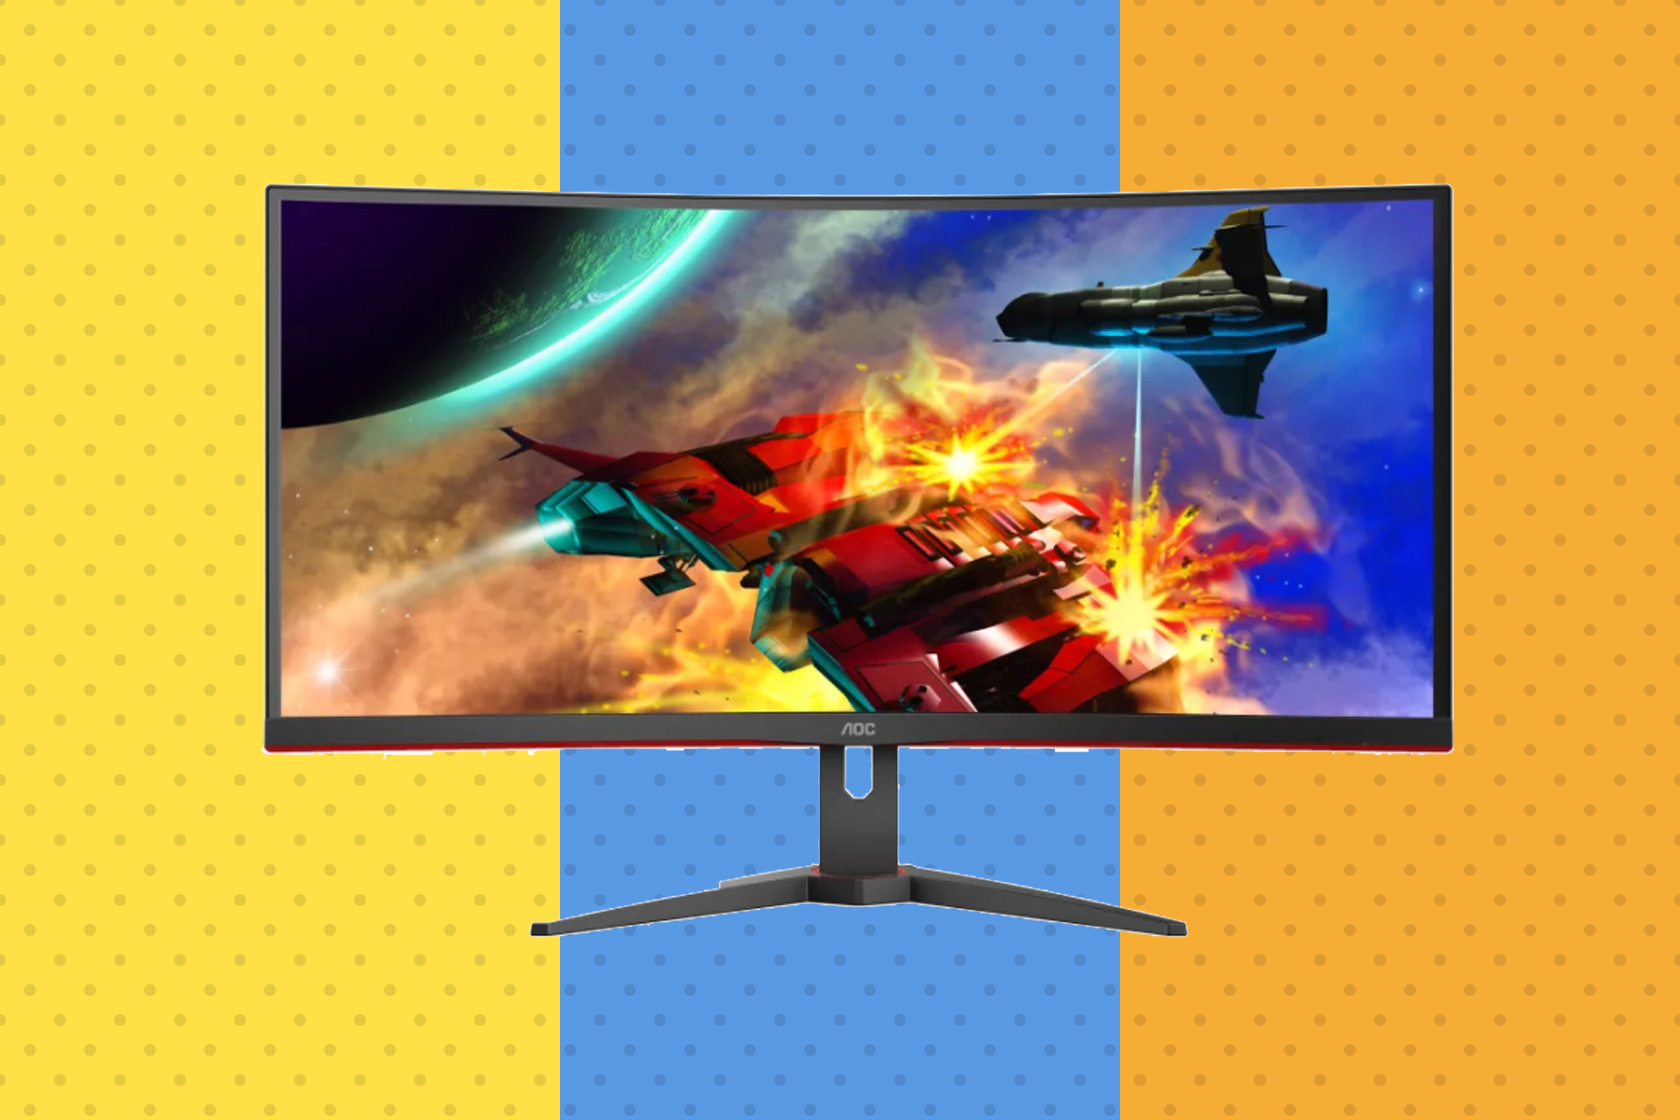 Score an AOC 34-inch curved ultrawide gaming monitor for only $229.99